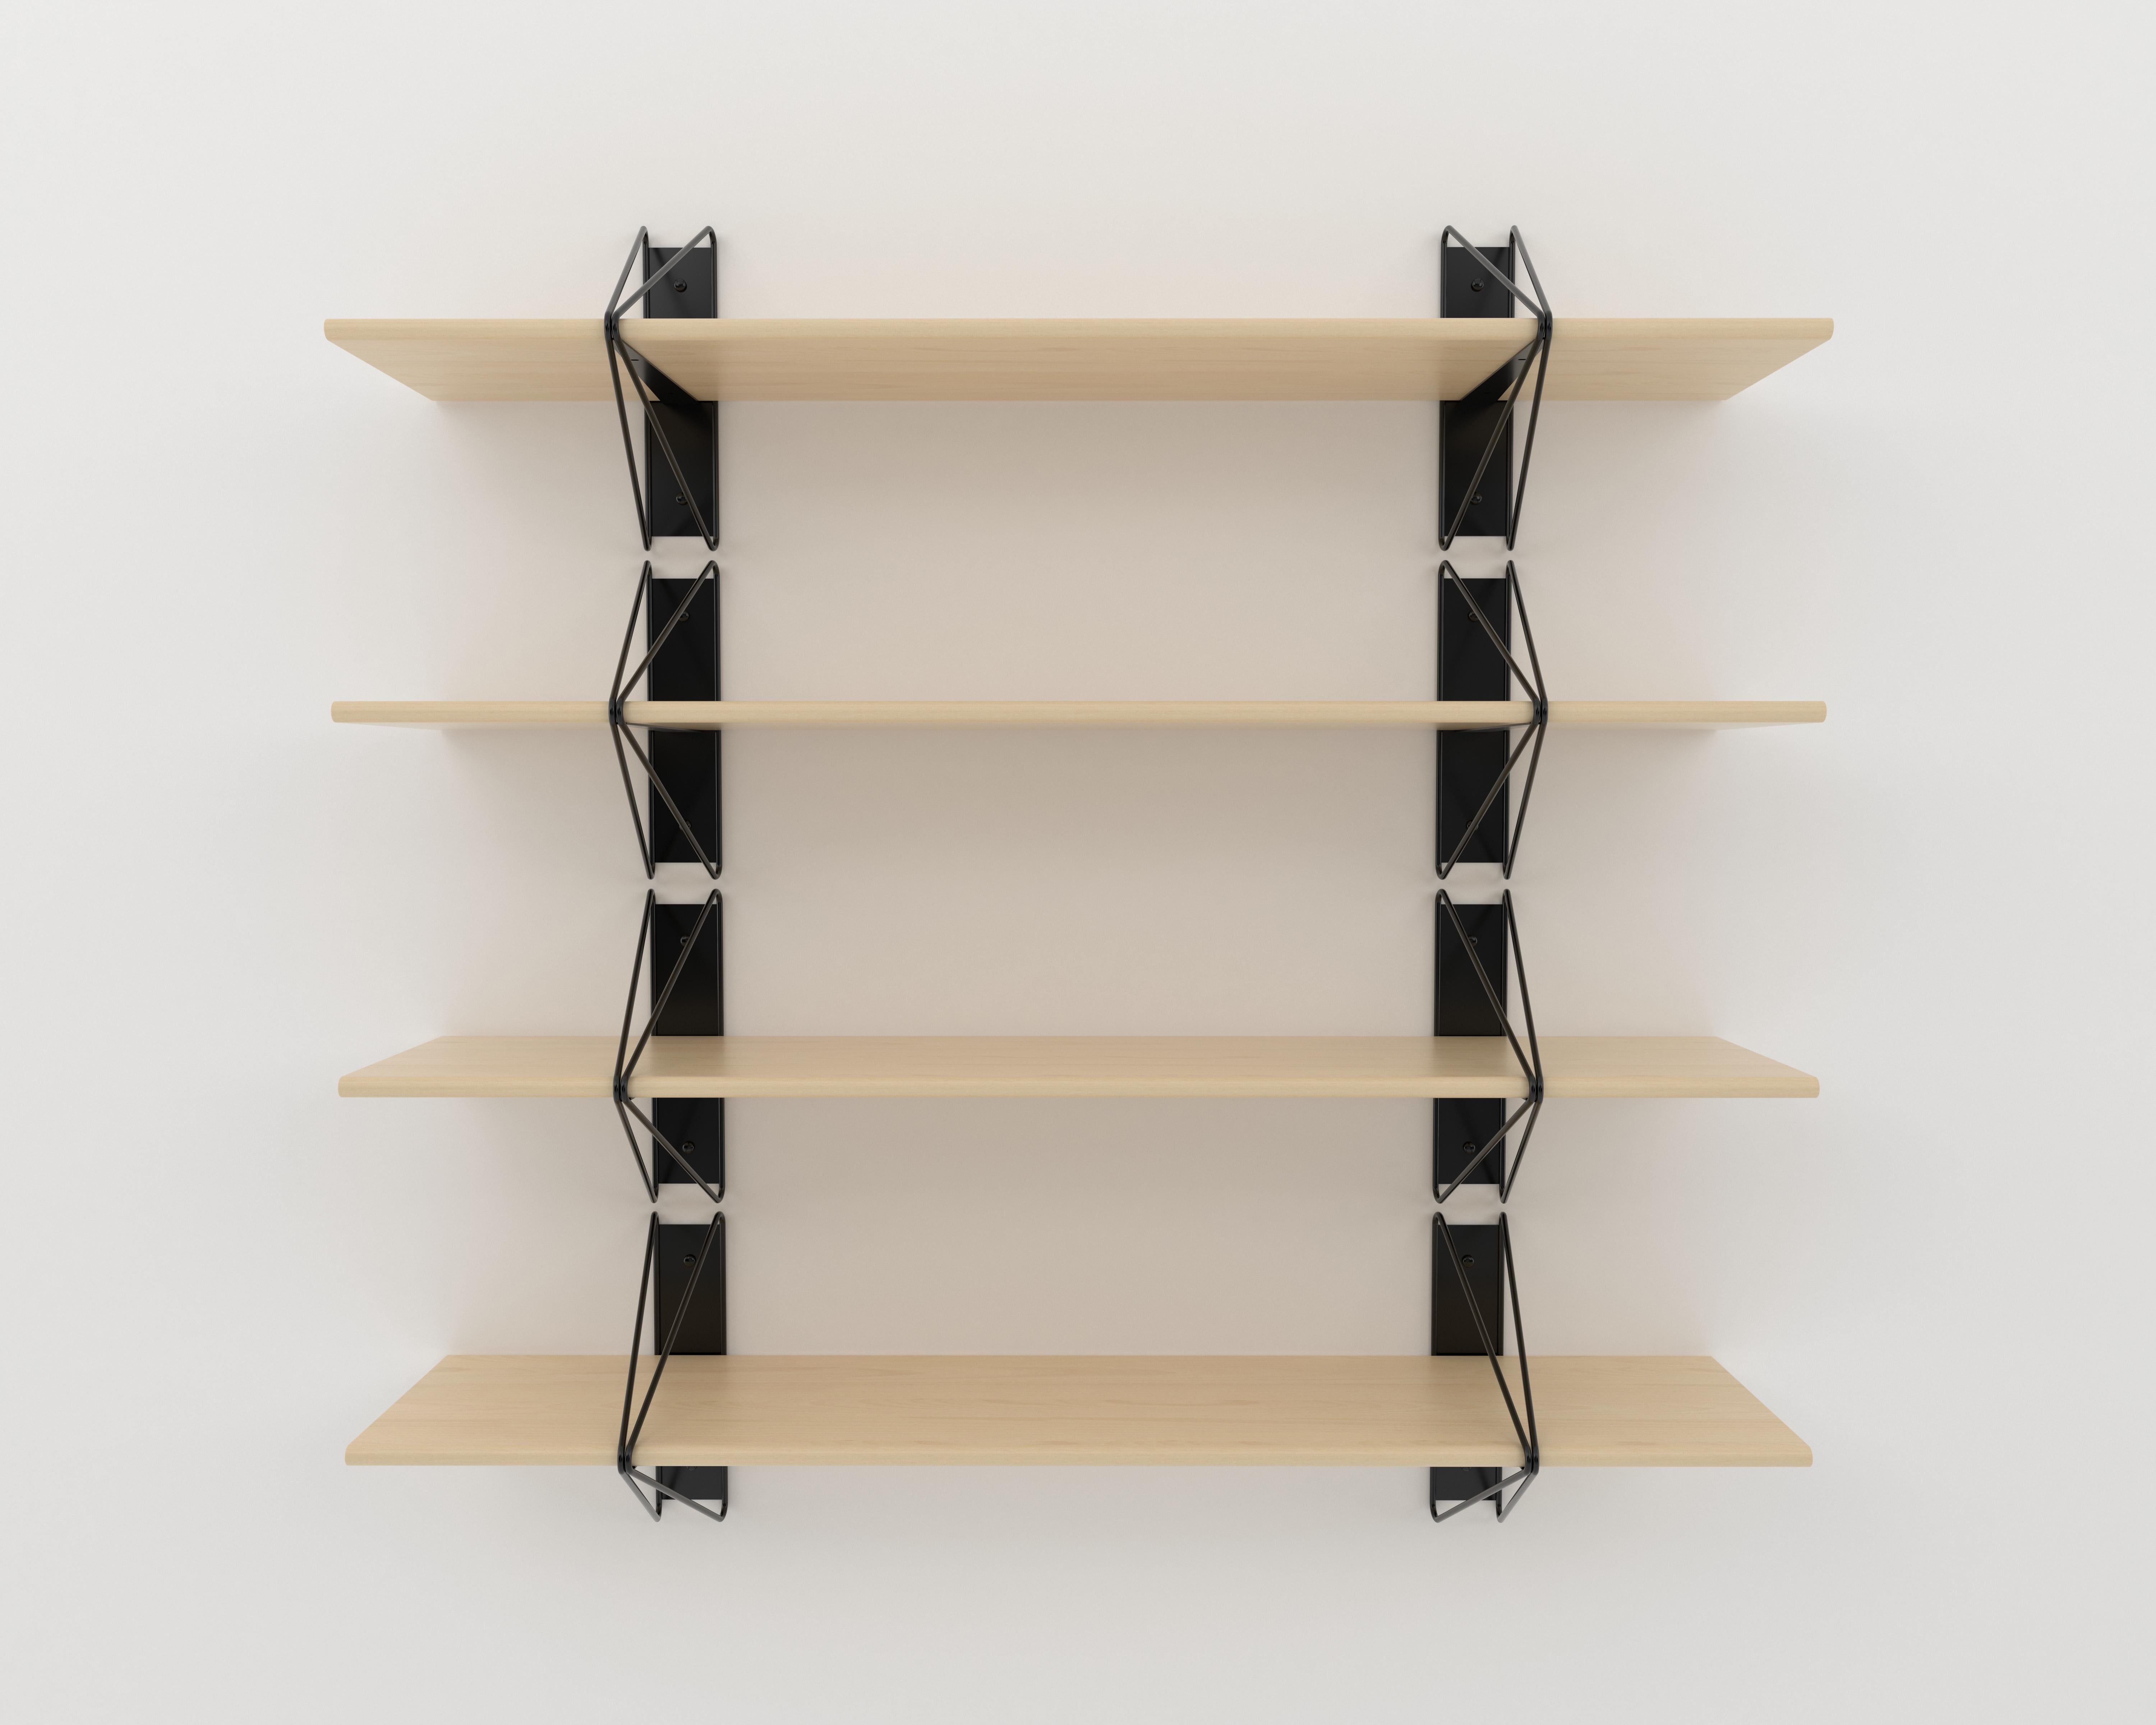 Powder-Coated Set of 5 Strut Shelves from Souda, Black and Walnut, Made to Order For Sale